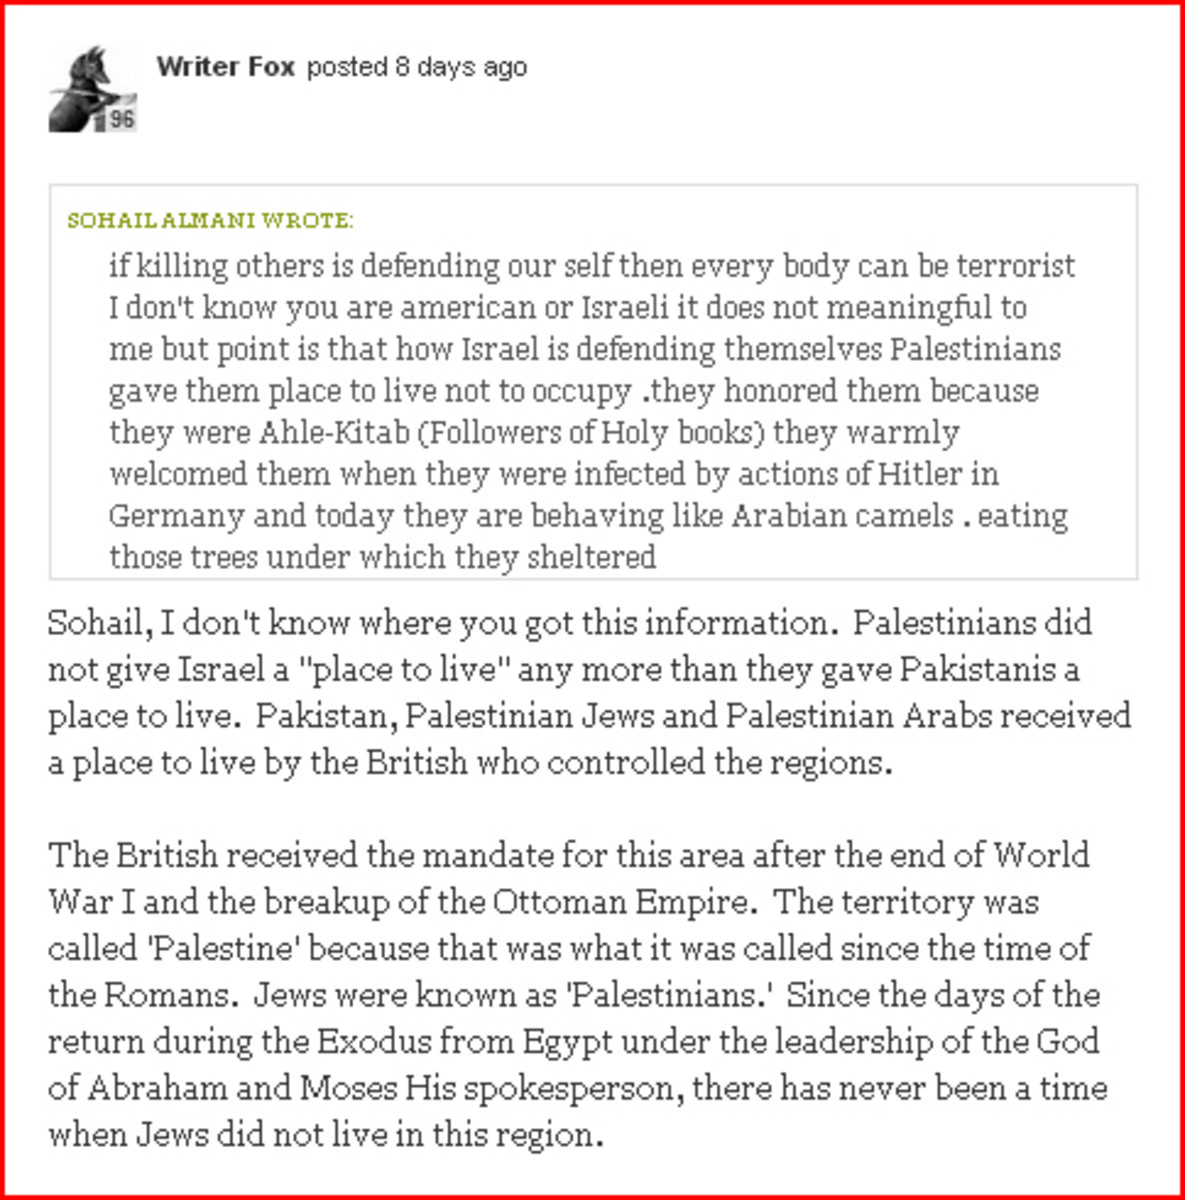 Israel/Palestine Conflict Questions from Pakistan